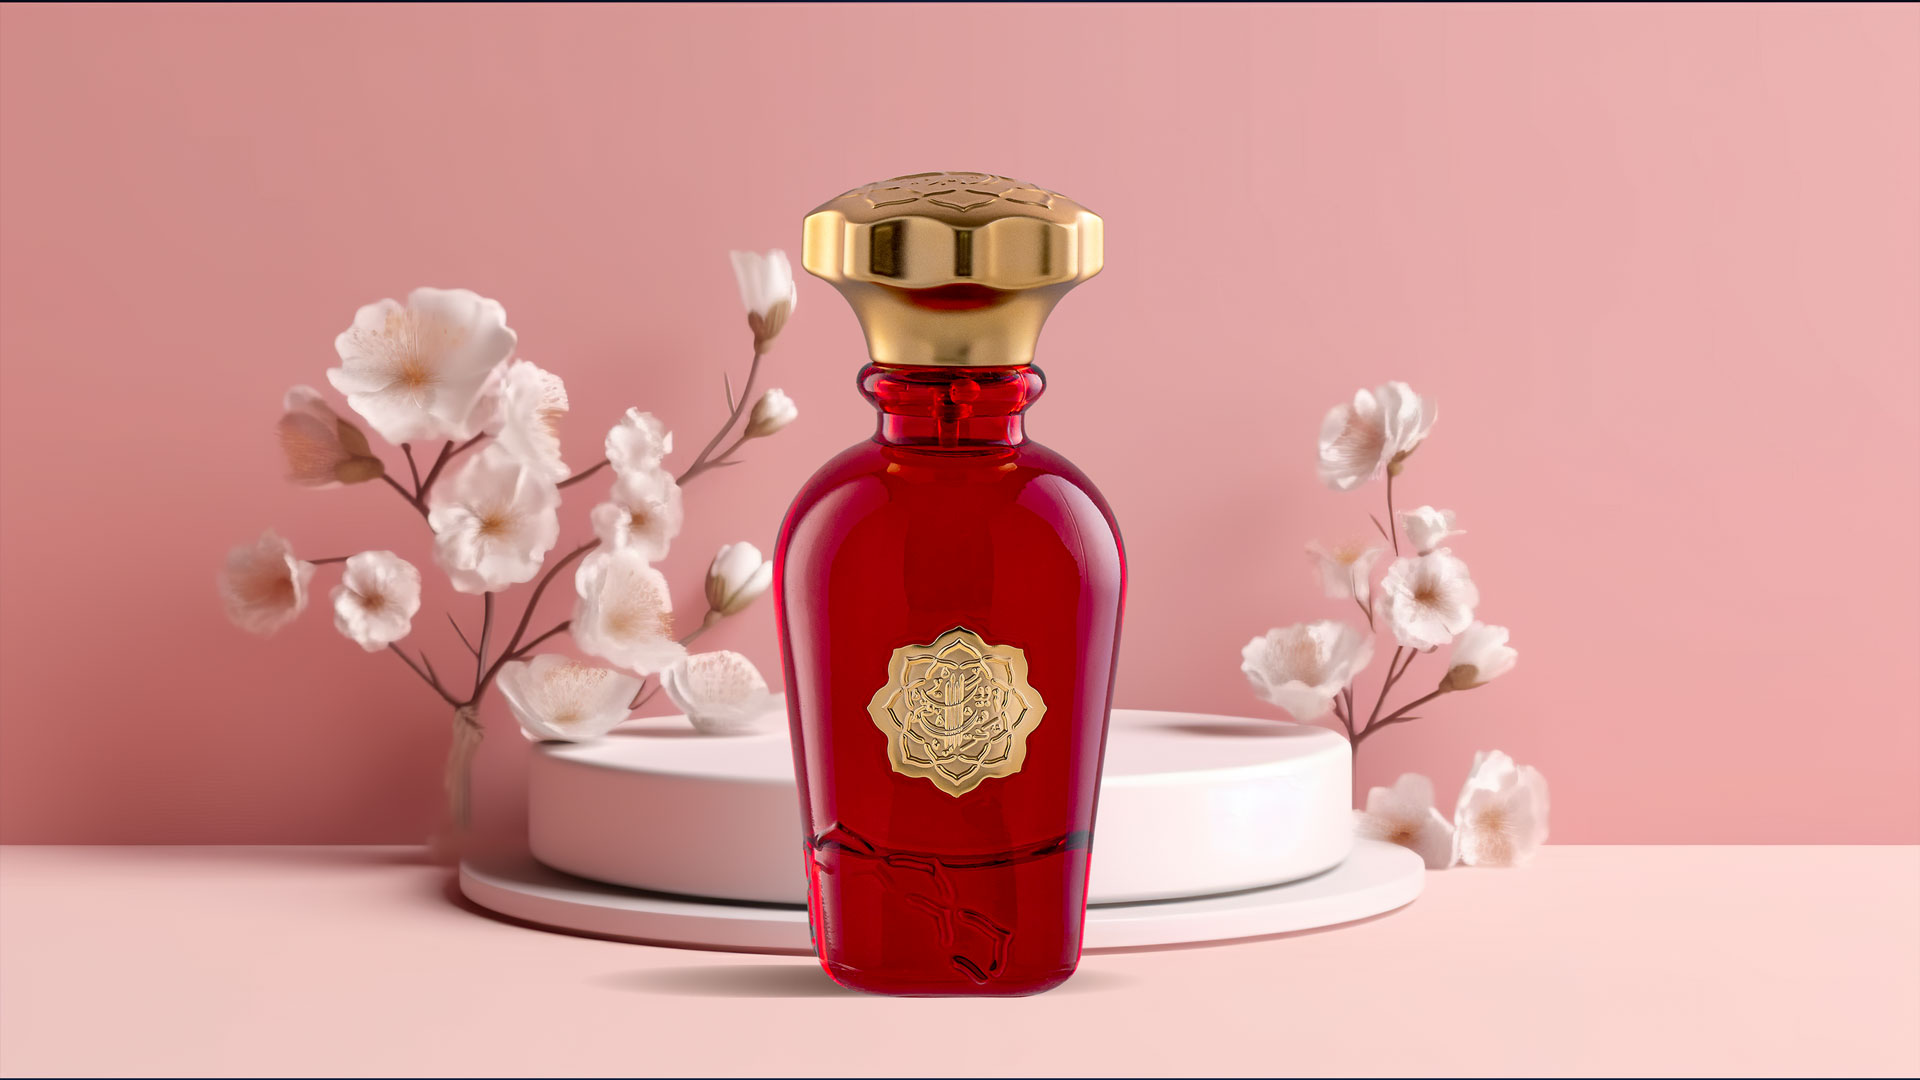 Bring Out Your Feminine Allure with the First-Copy Valentino Women's Perfumes